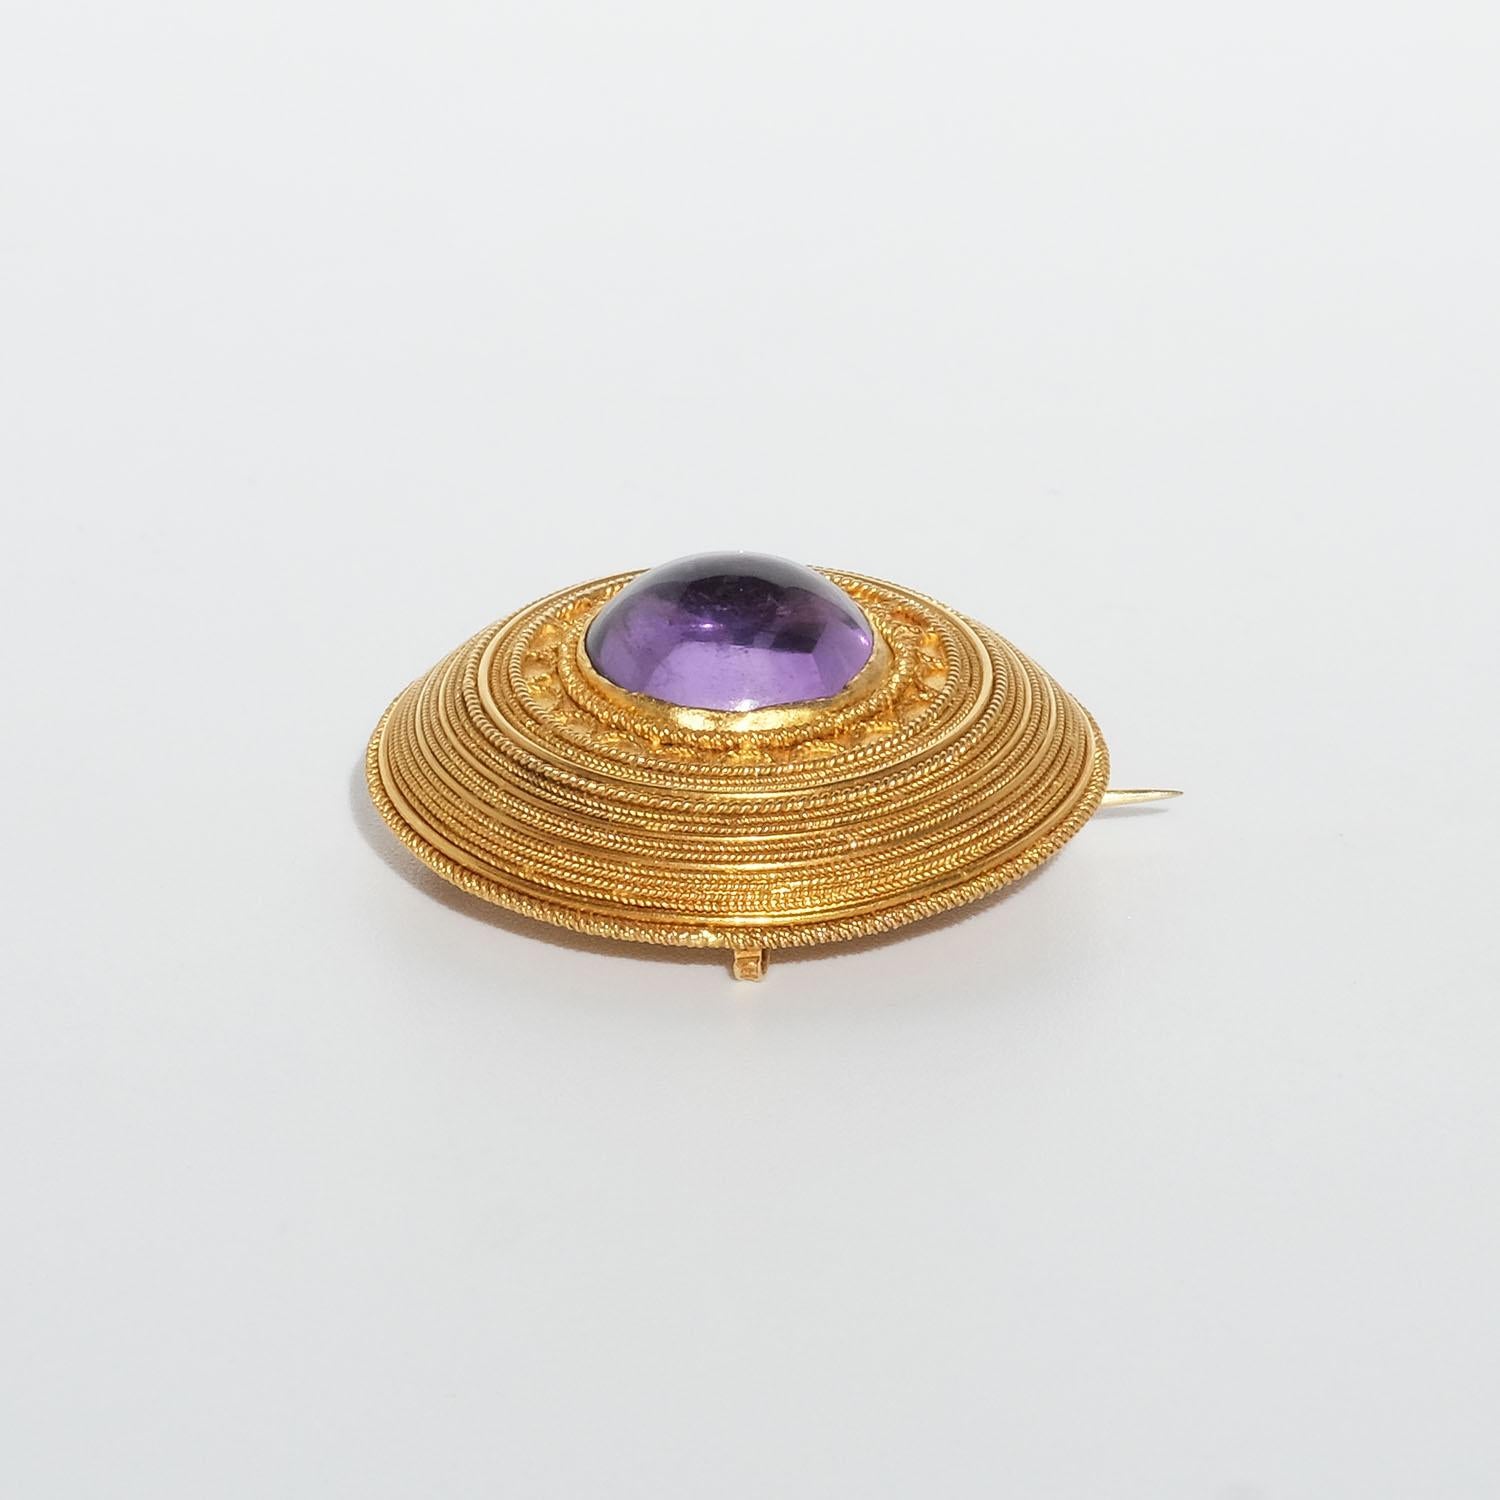 This antique 18 karat gold brooch is adorned with a center cabochon cut amethyst. The frame around the stone is beautifully patterned making it resemble a shield from ancient Greece.

The brooch is equipped with a loop which is why it can also be